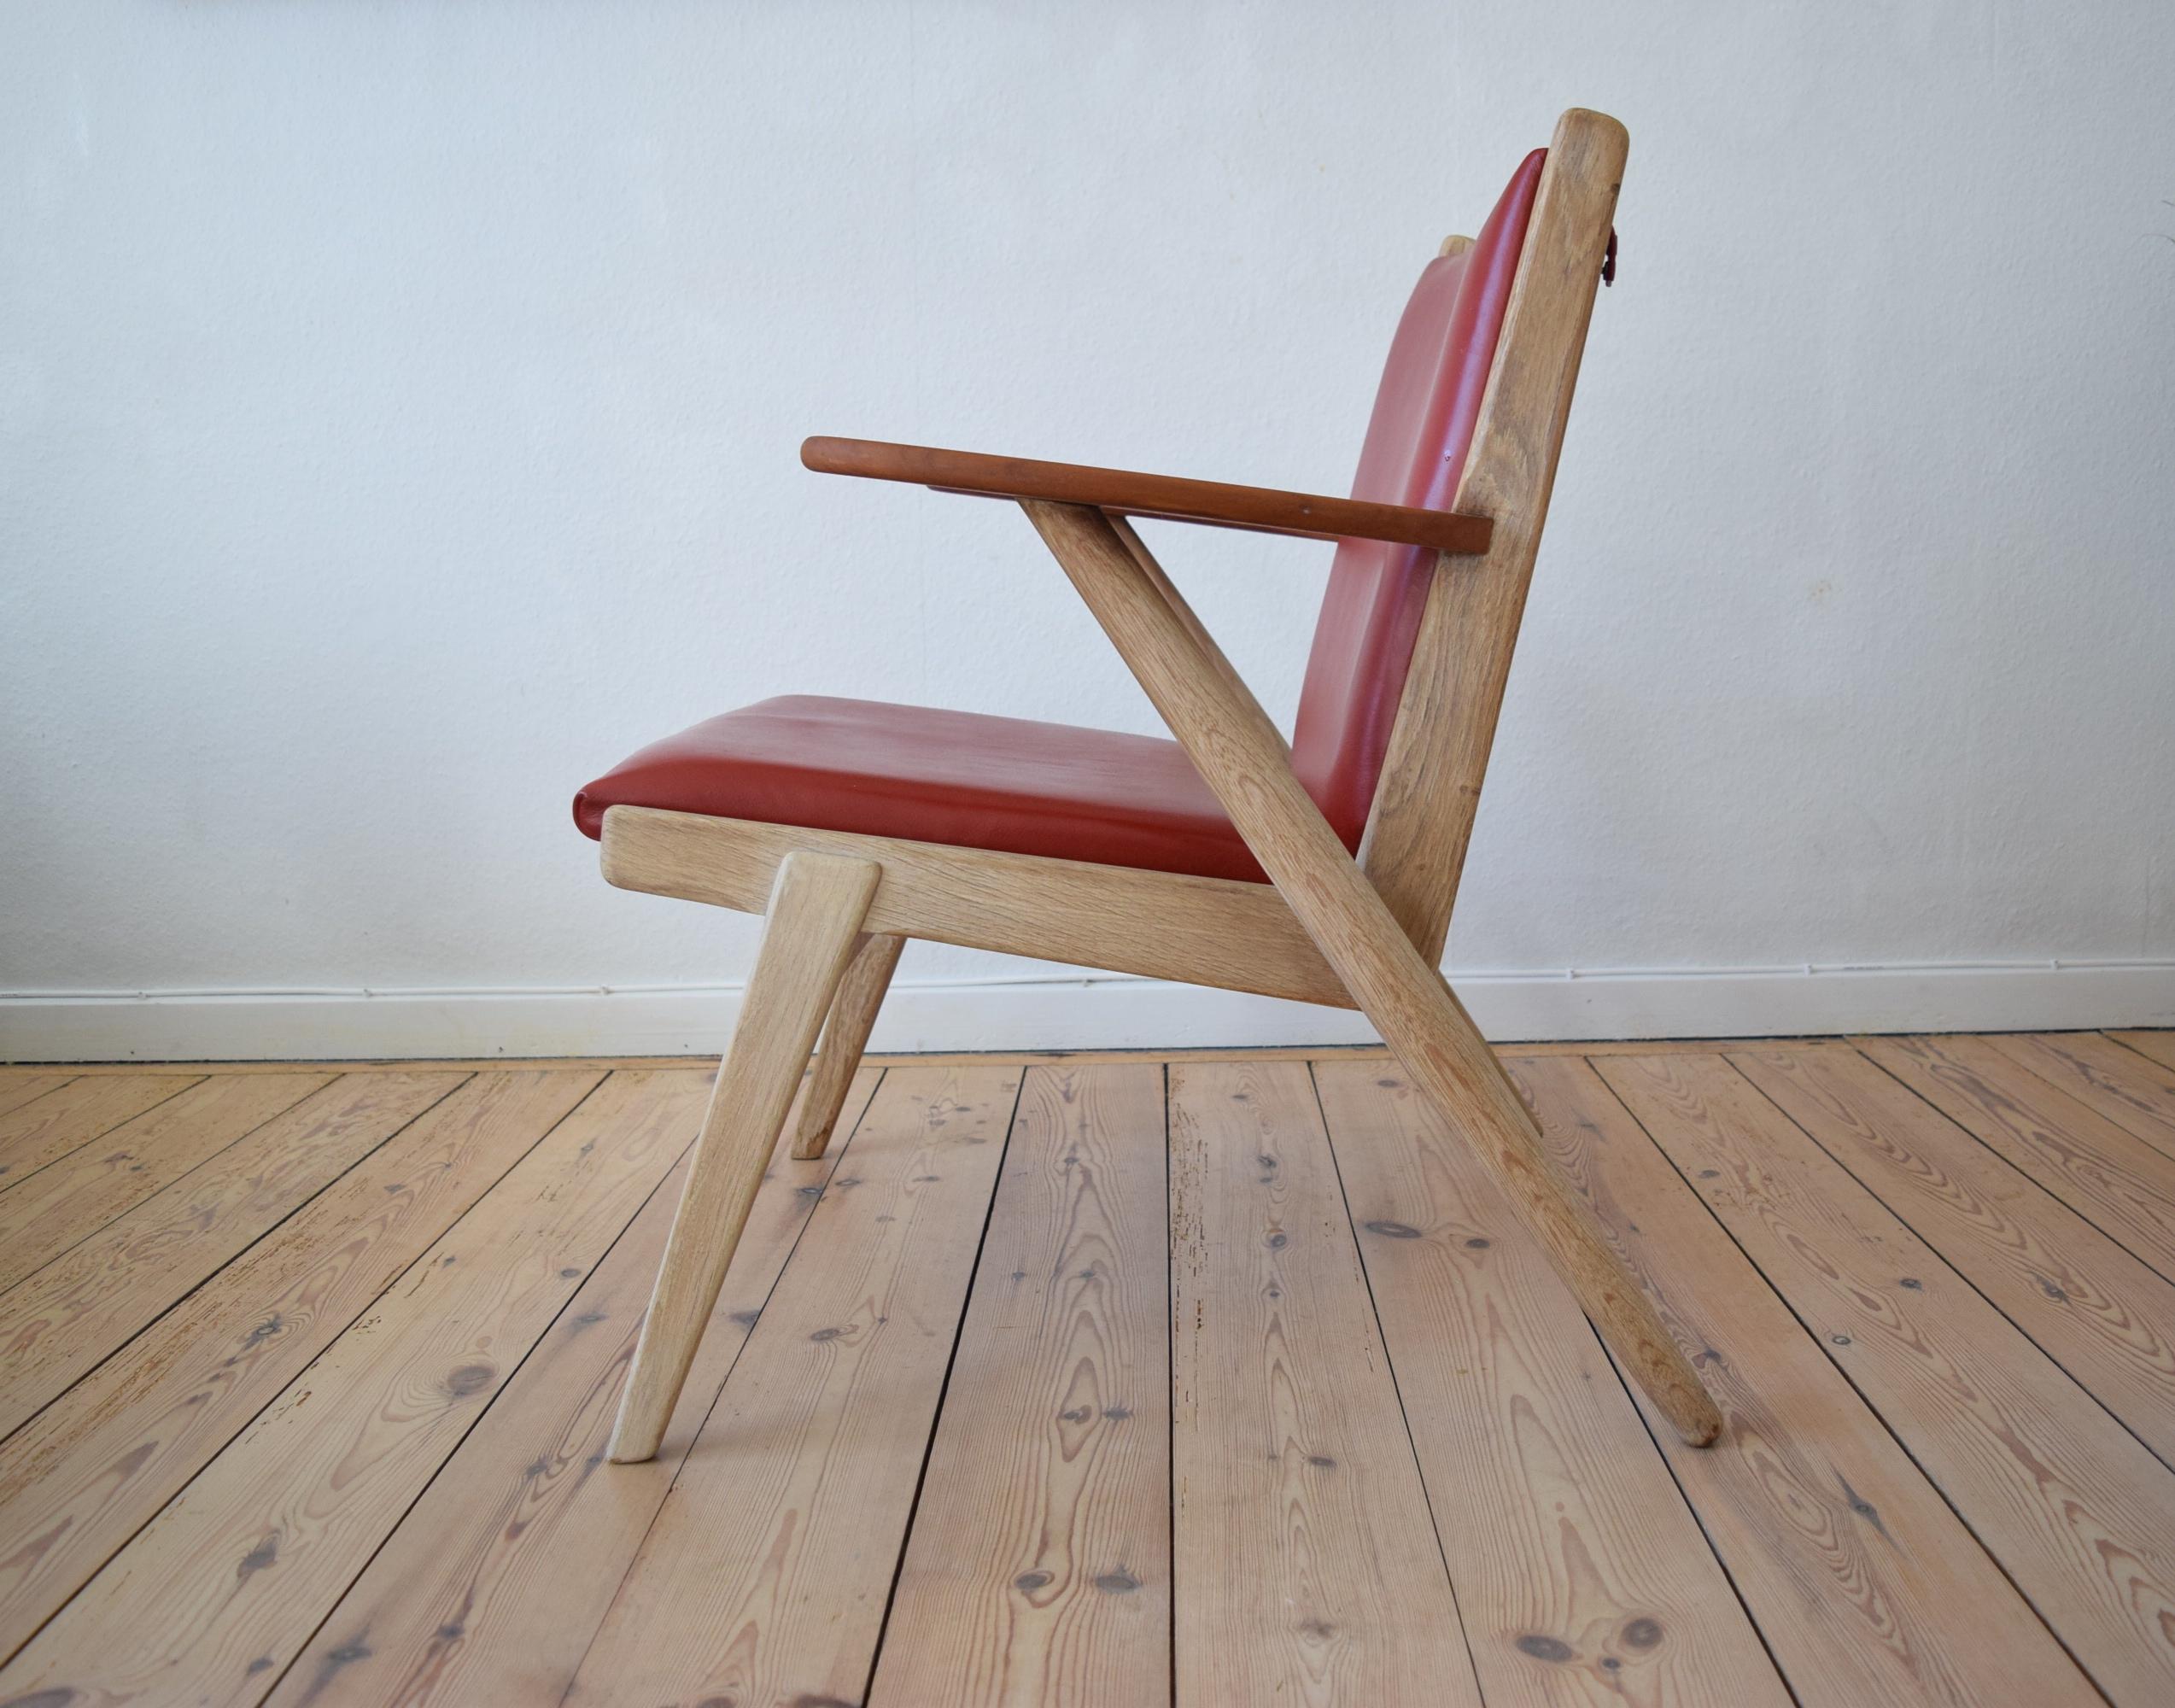 Midcentury Danish teak lounge chair designed by Arne Wahl Iverson for Hans Hansen & Sons, Odense. This chair is in oak with teak paddle armrests and are covered in soft red aniline leather. Reminiscent of similar designs by Hans Wegner (Cigar Chair)